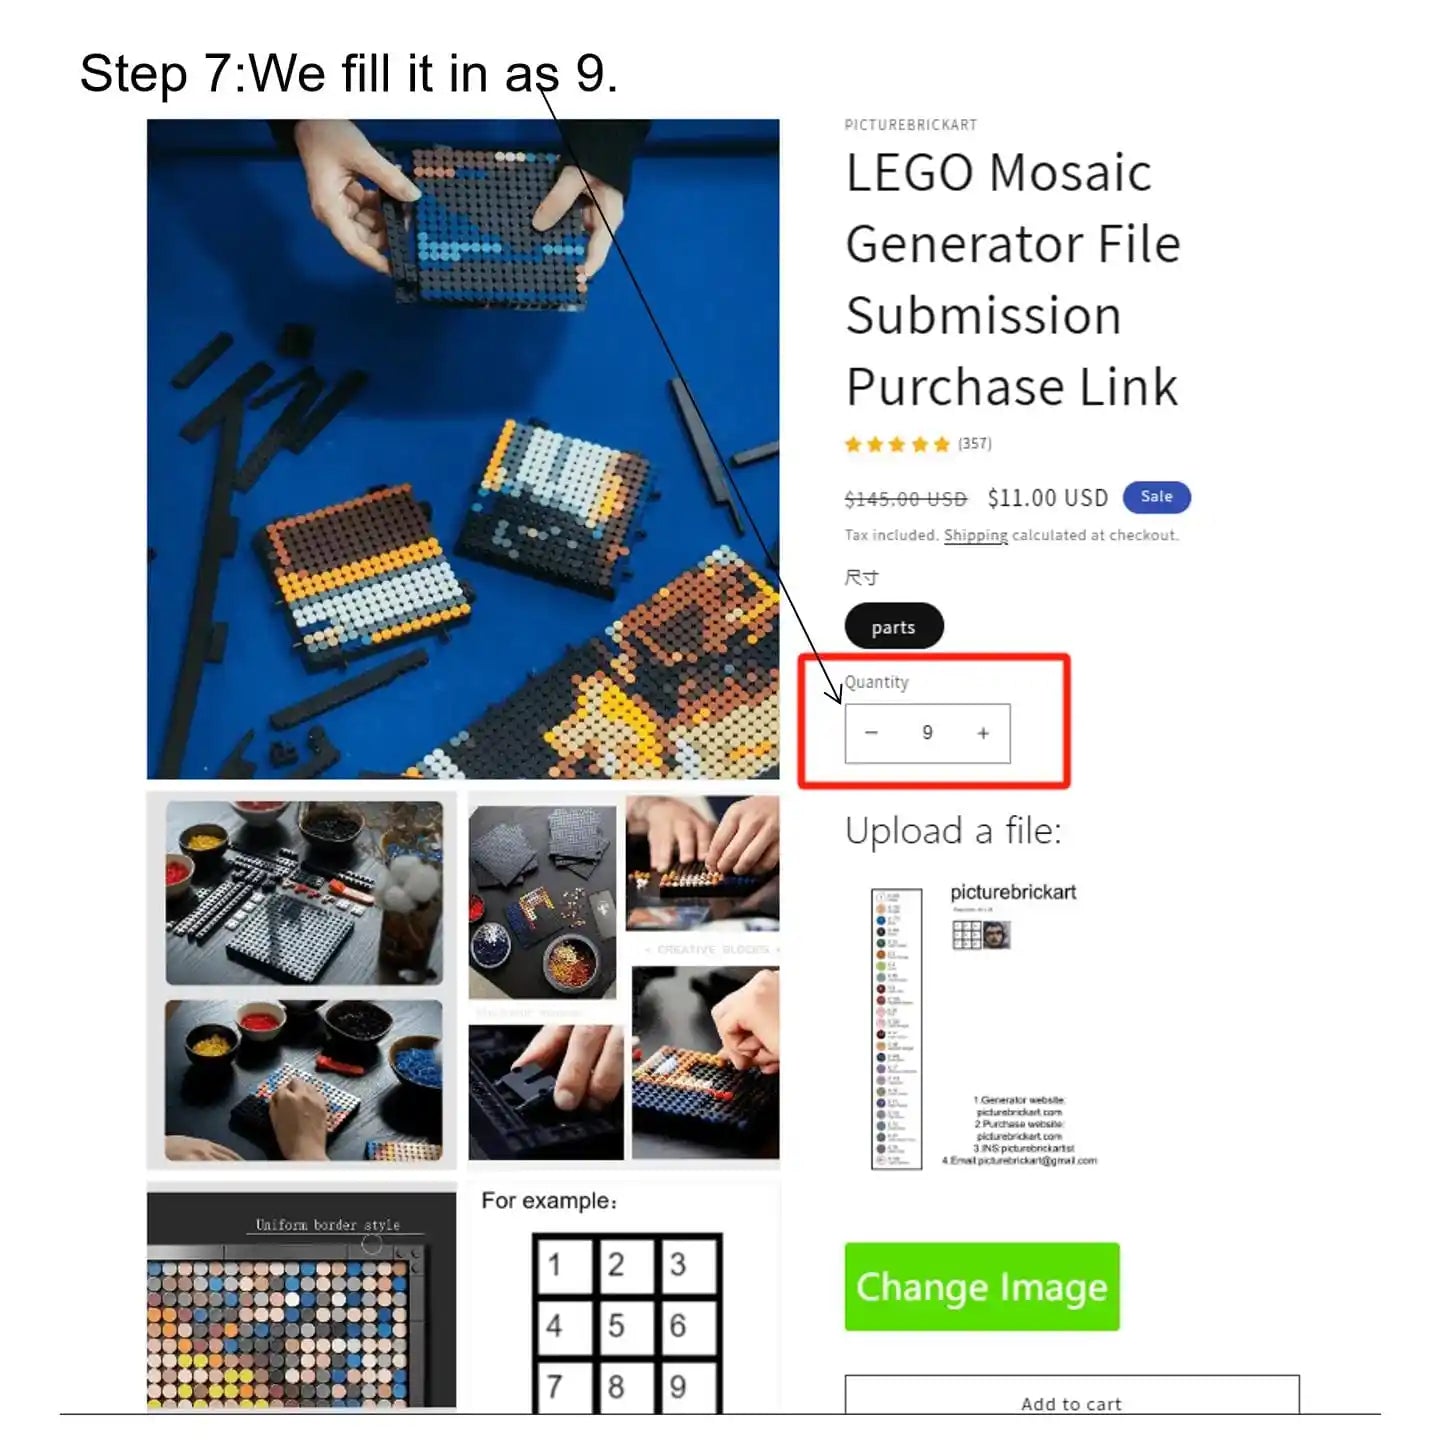 LEGO Mosaic Generator File Submission Purchase Link